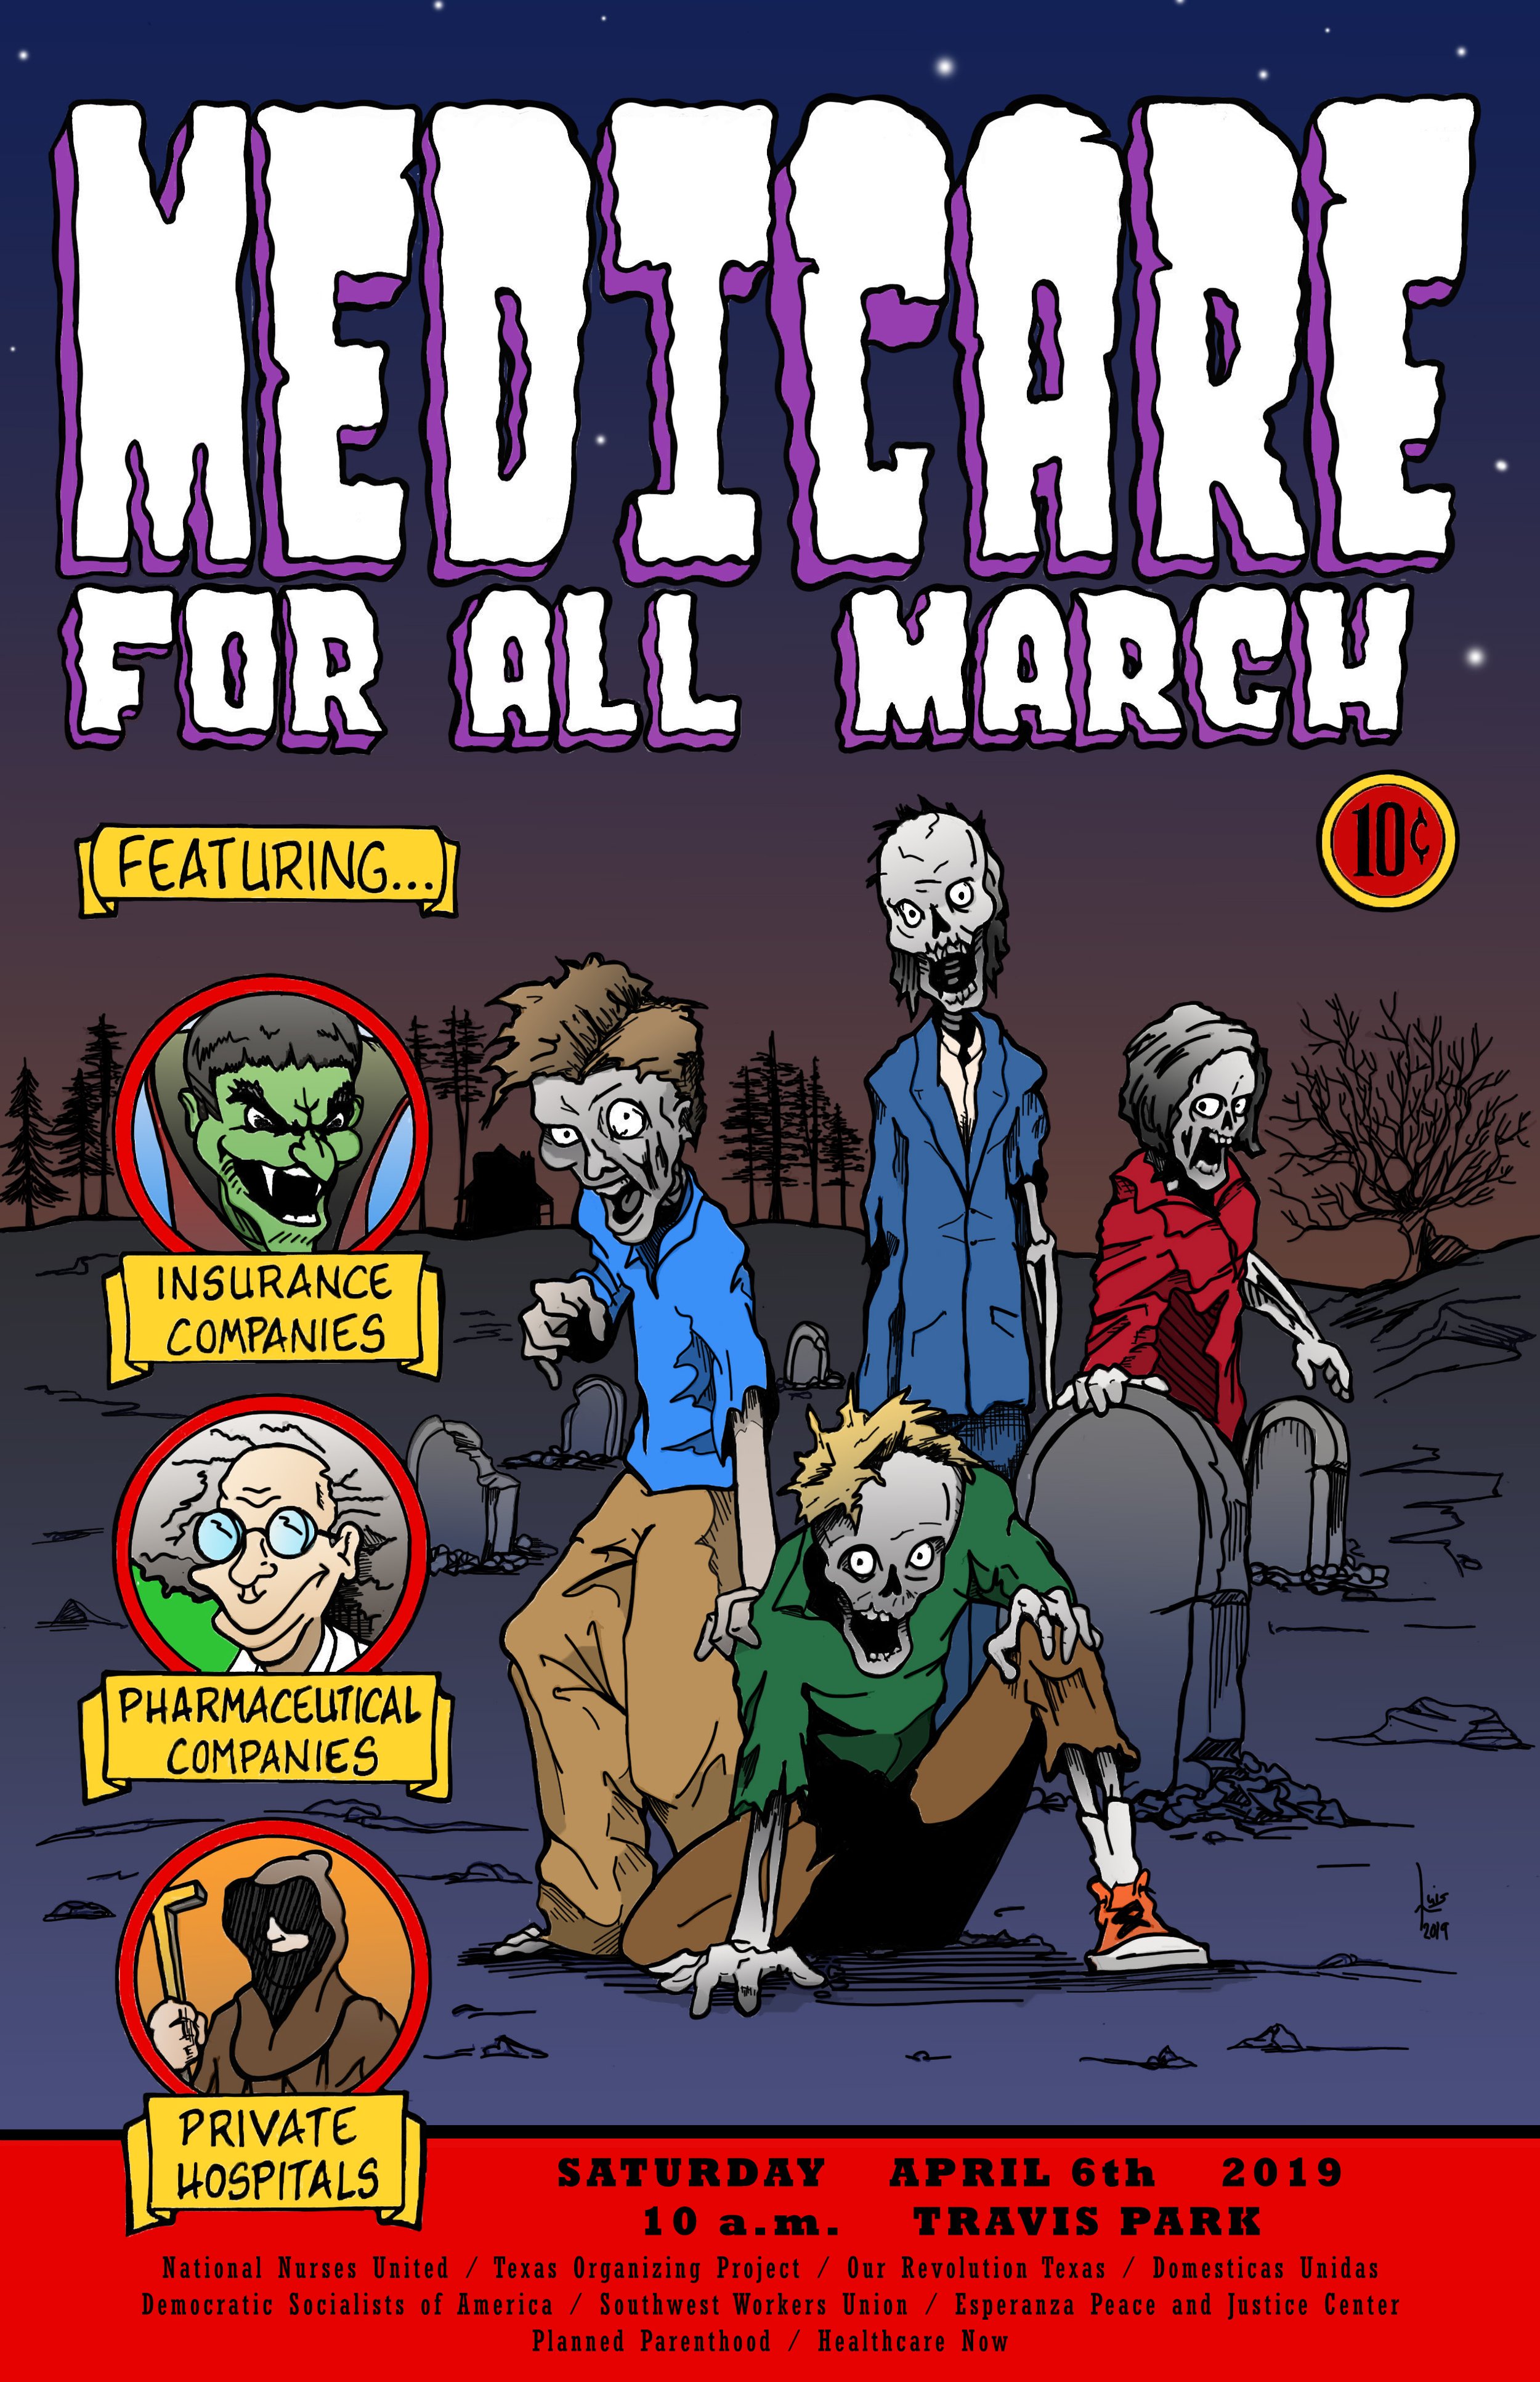 2019 Medicare for All March Promotional Poster 